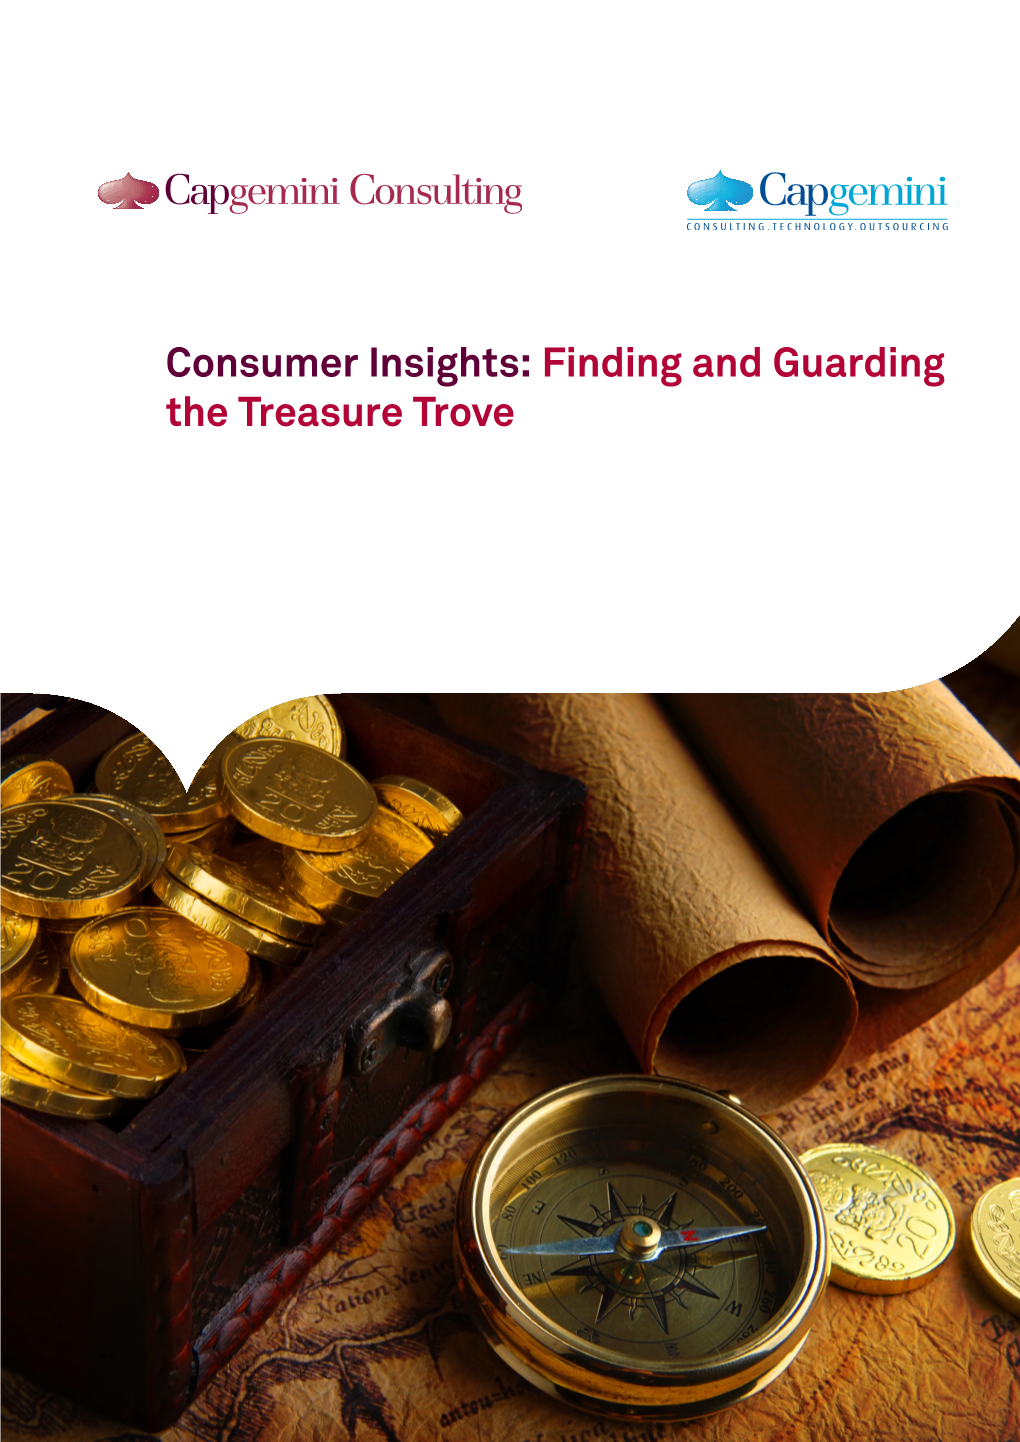 Consumer Insights: Finding and Guarding the Treasure Trove Executive Summary